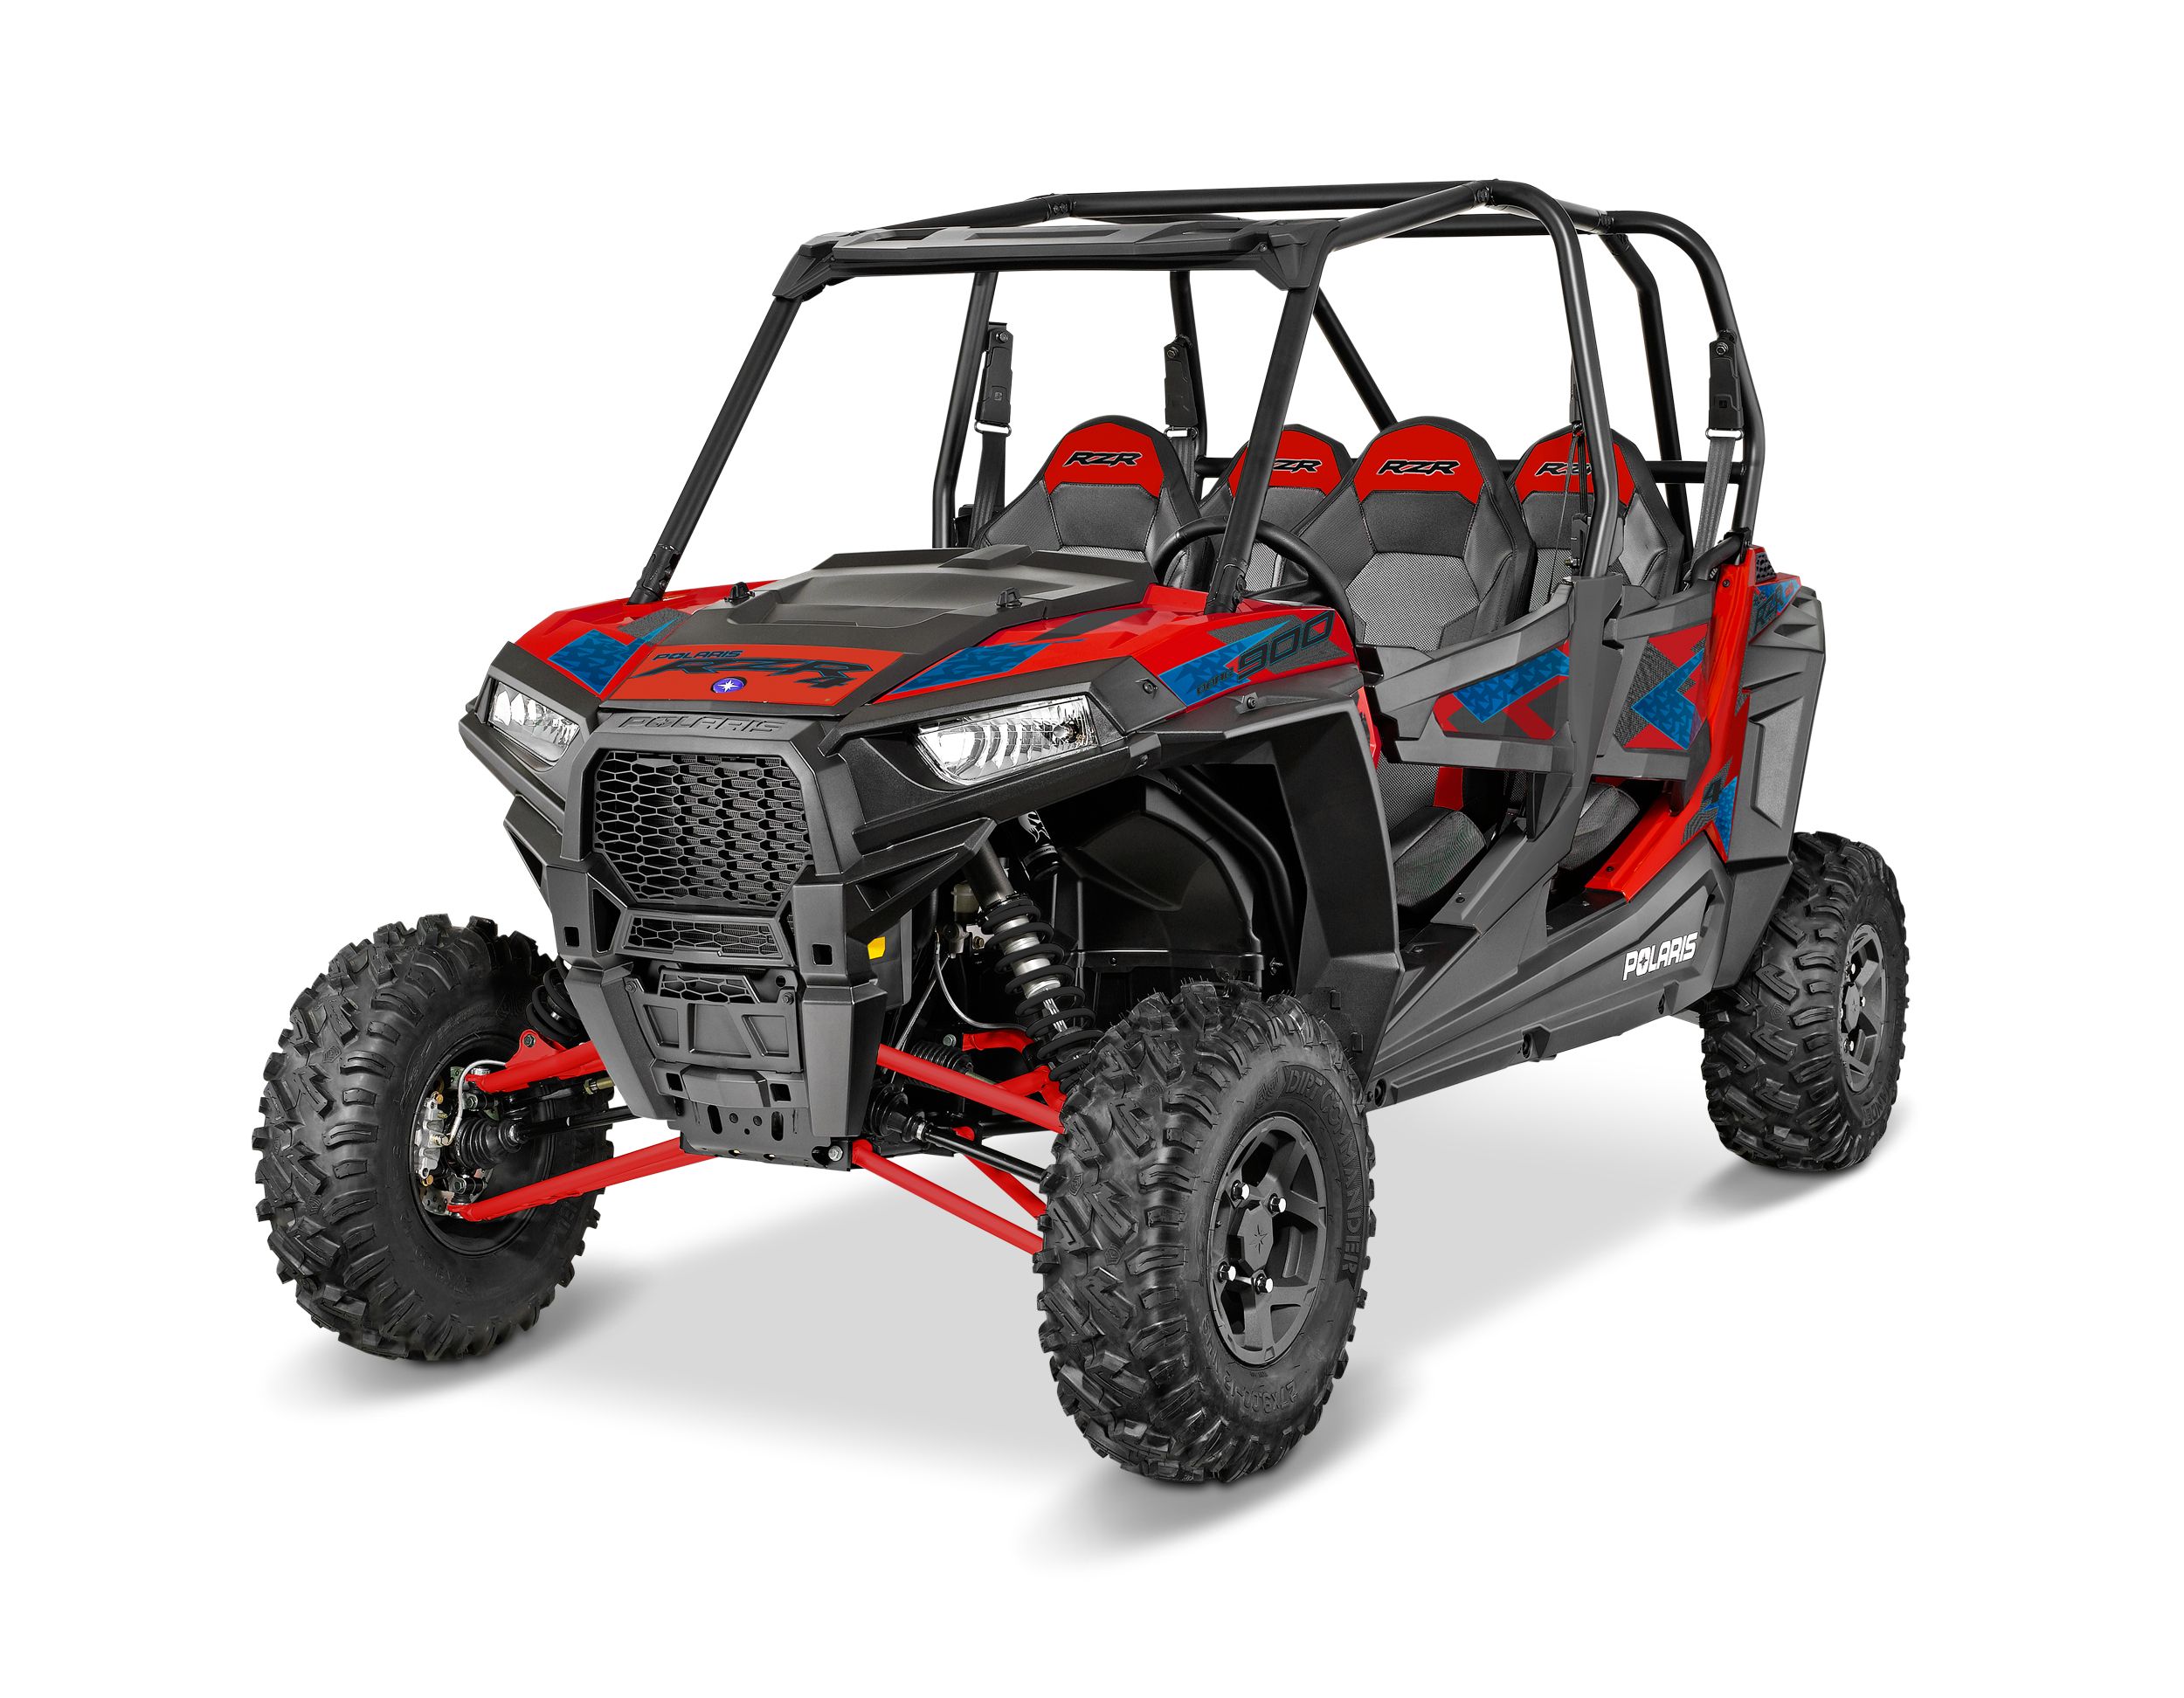 ALL NEW POLARIS XP TURBO, RZR S ACE 900 AND MORE!. Dirt